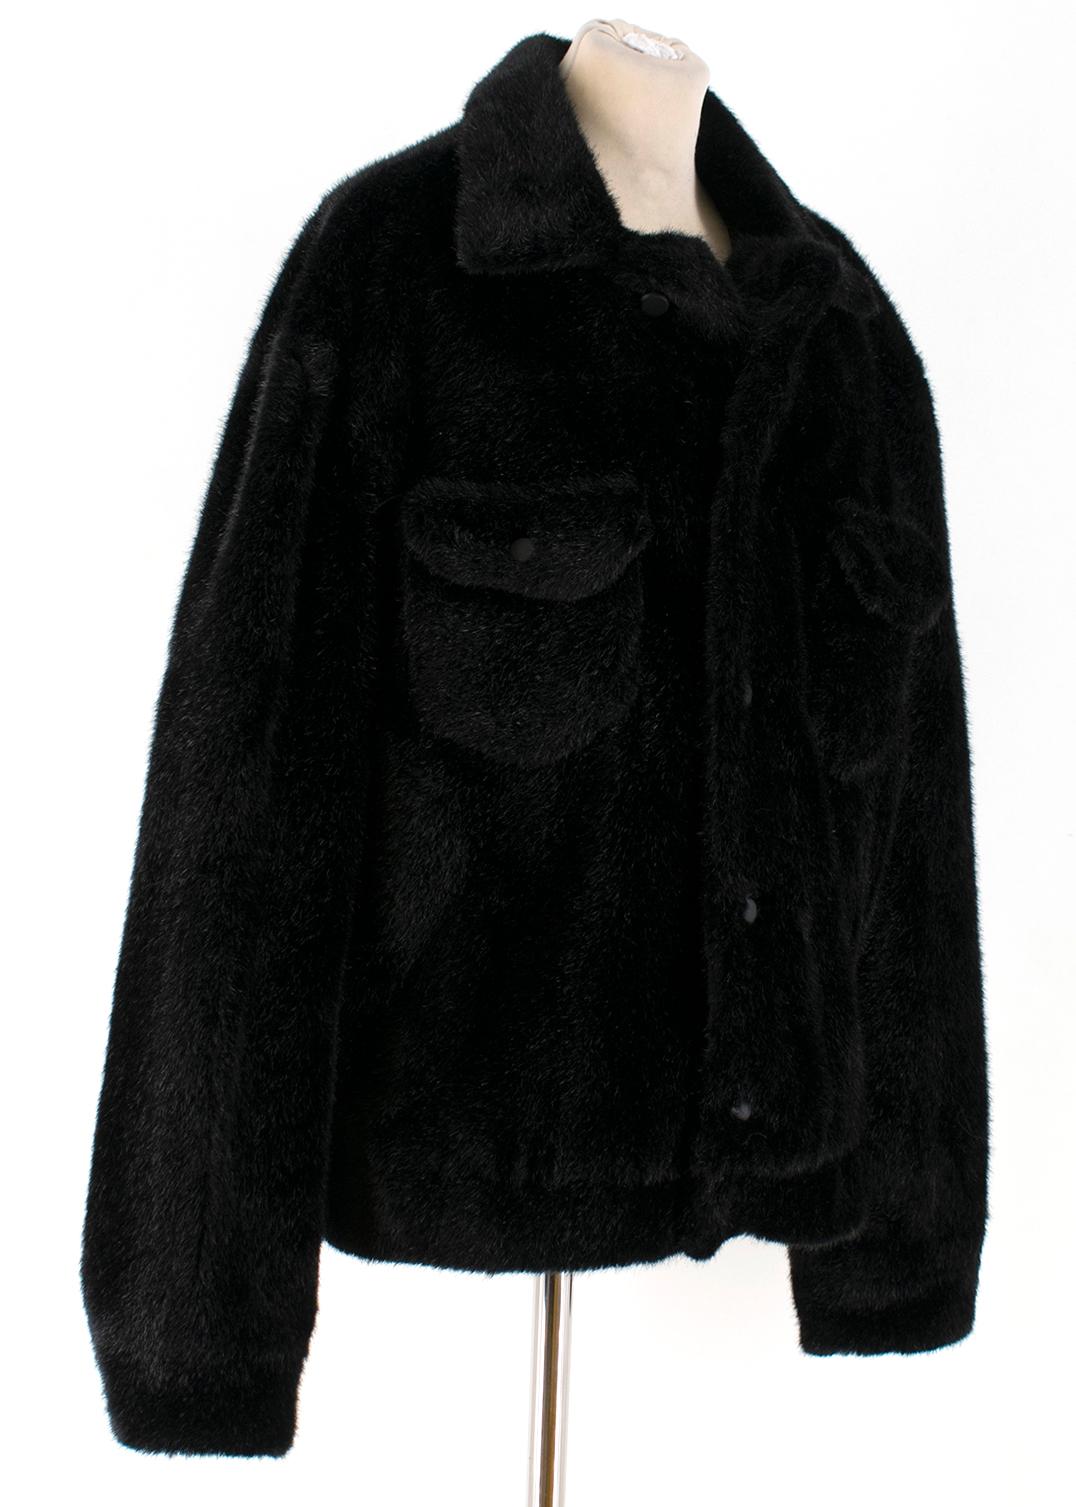 JW Anderson X ASAP Rocky Faux Fur Teddy Coat

- Black teddy bear faux fur jacket
- Button fastening
- Front bust buttoned pockets and side pockets
- Lined
- Long sleeves with buttoned cuffs

Please note, these items are pre-owned and may show some